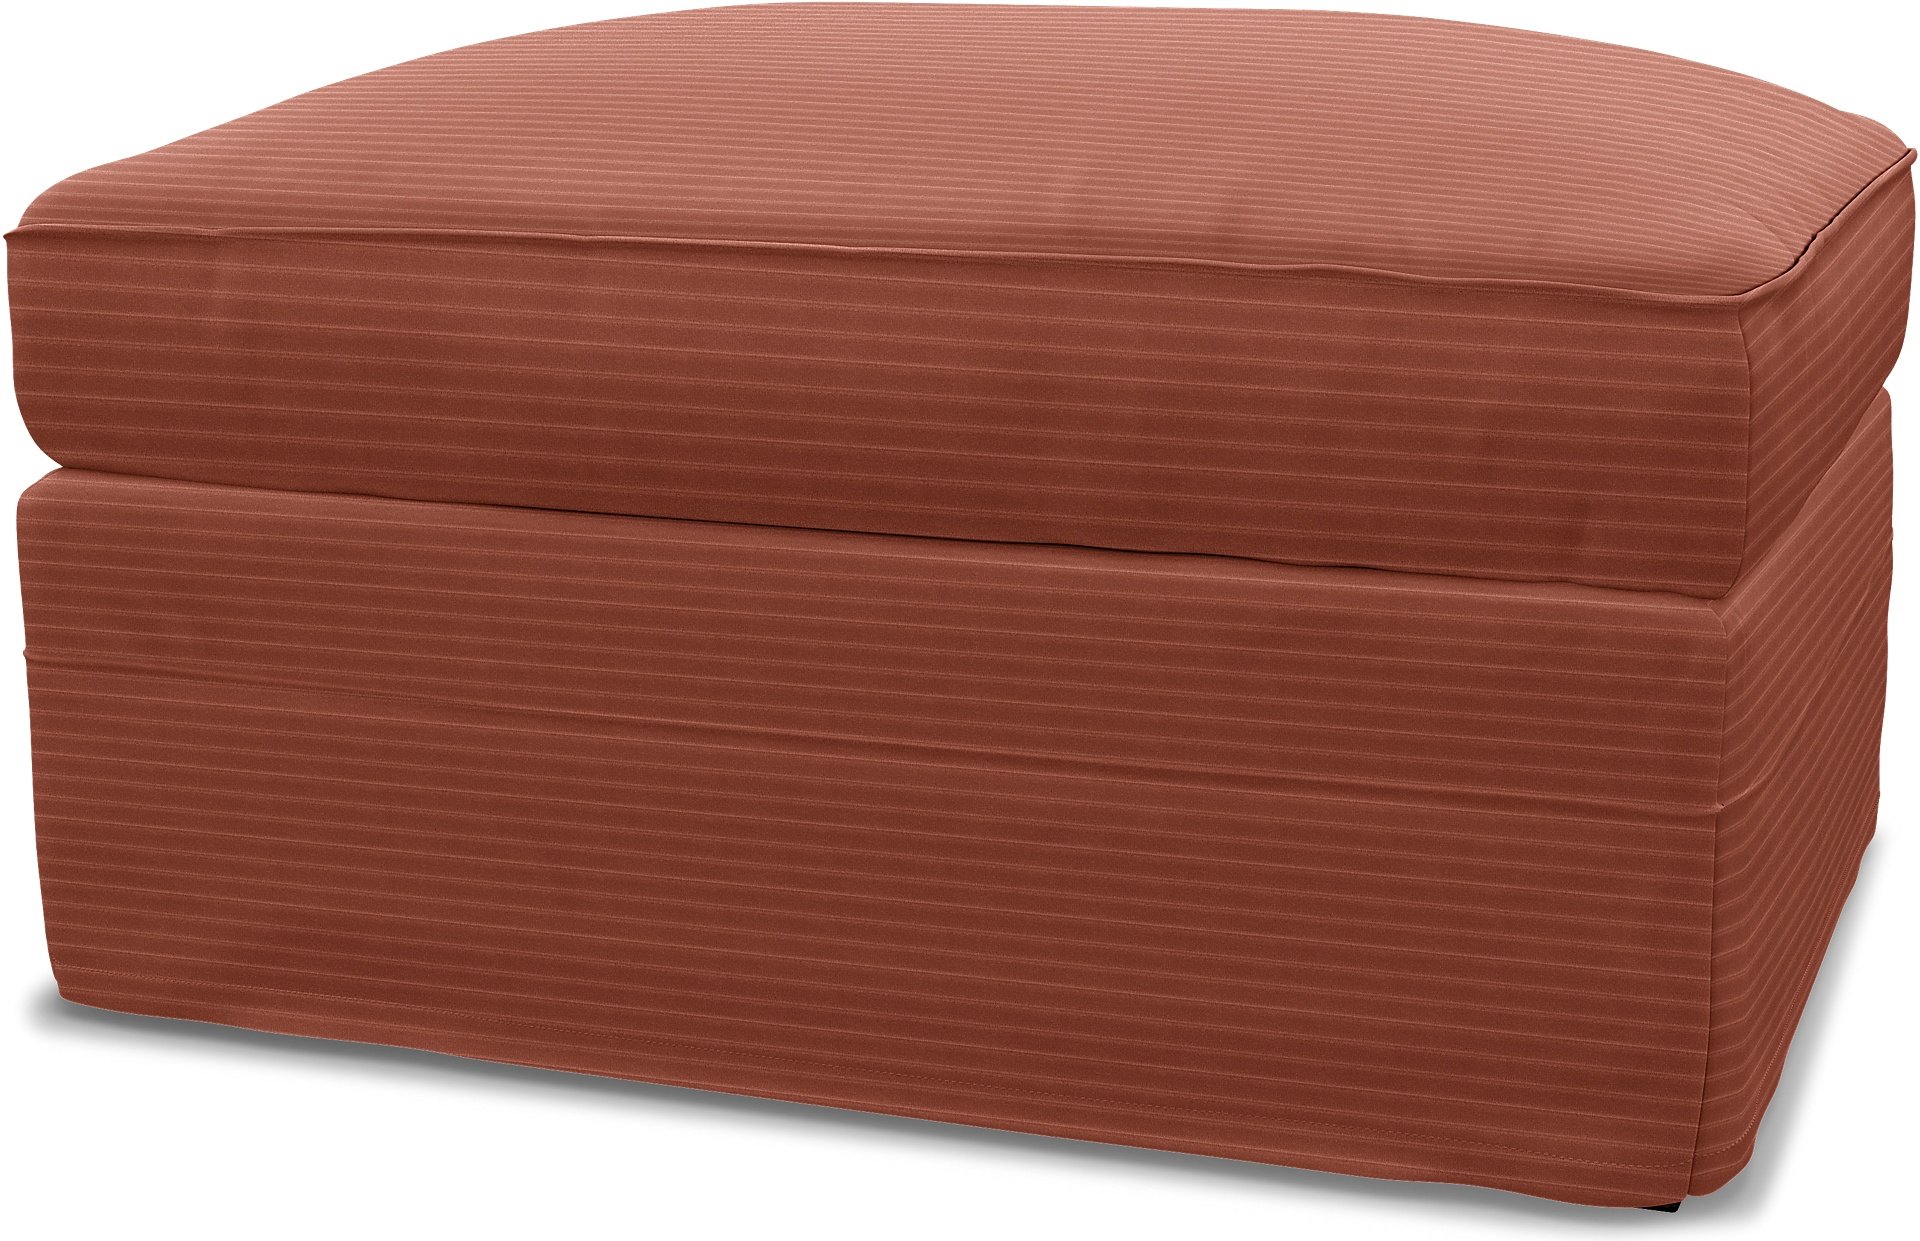 IKEA - Gronlid Footstool with Storage Cover, Retro Pink, Corduroy - Bemz